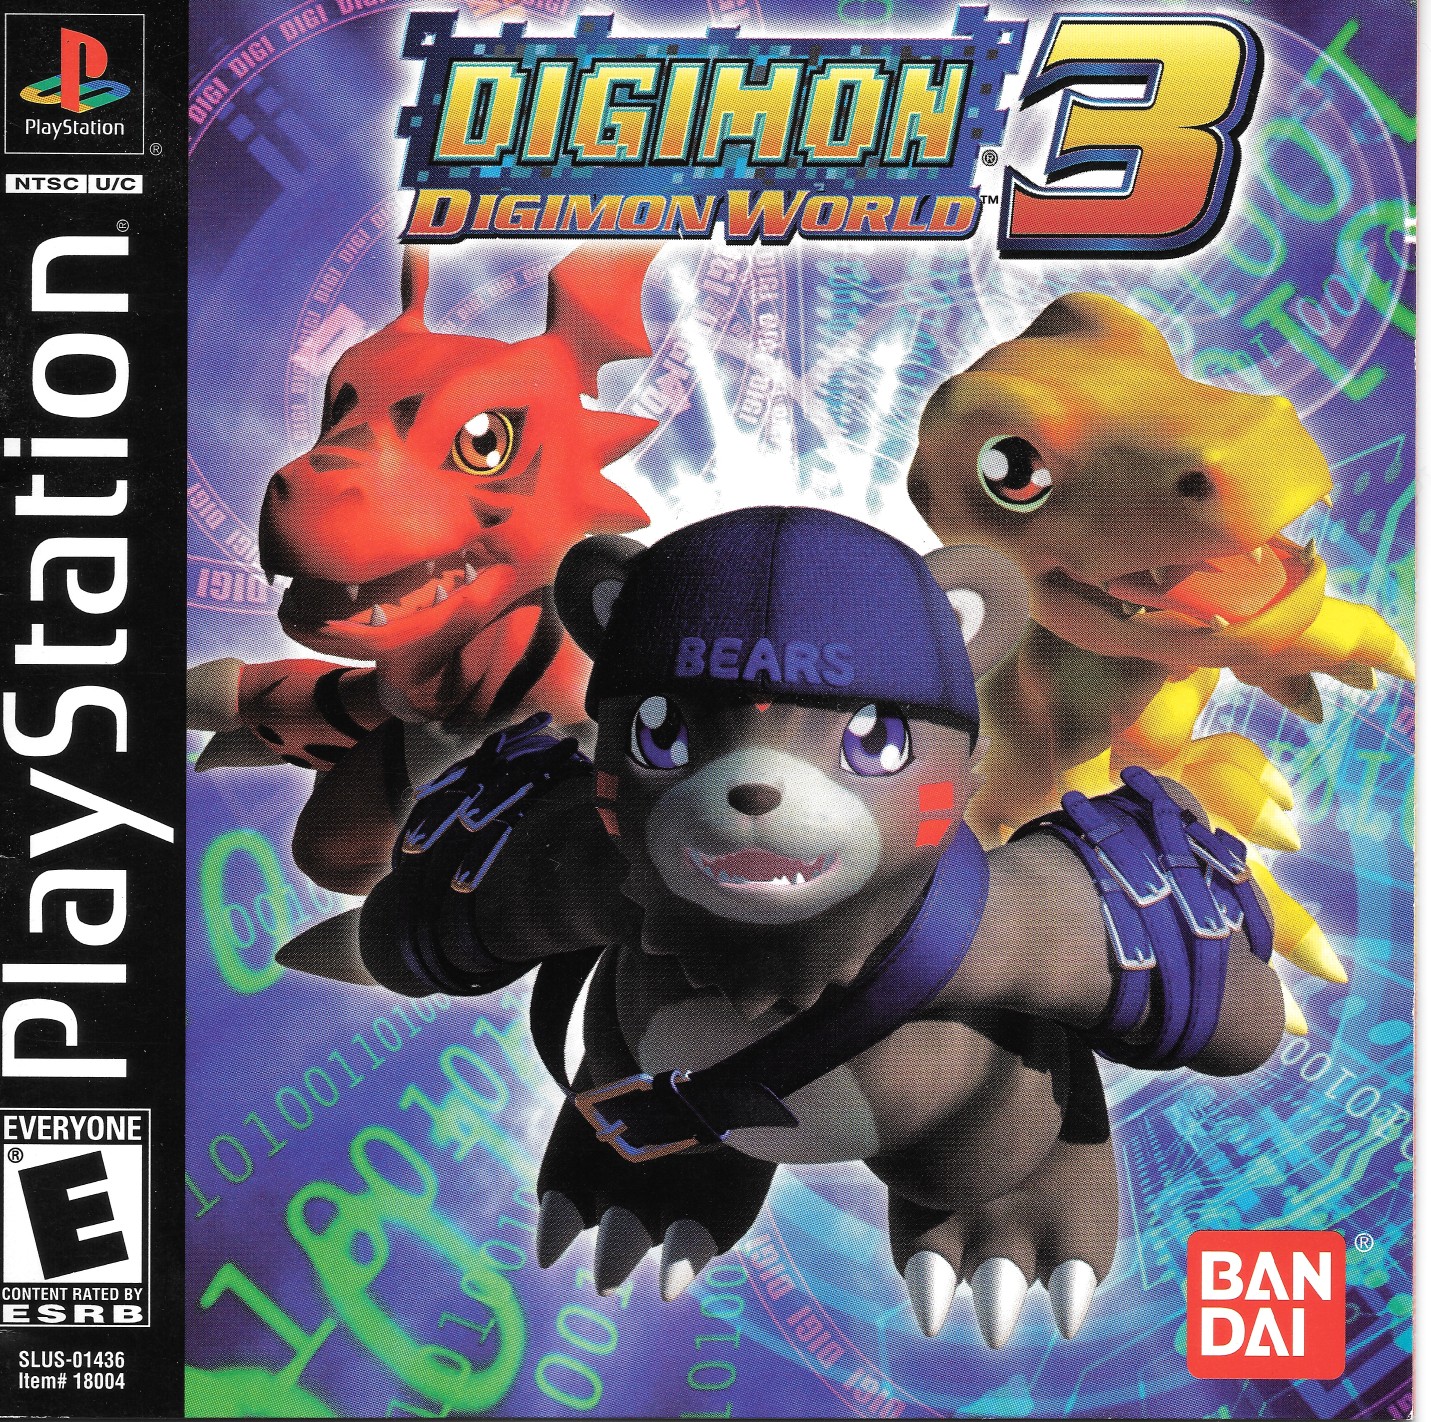 digimon world 3 save files psx isos on ps3